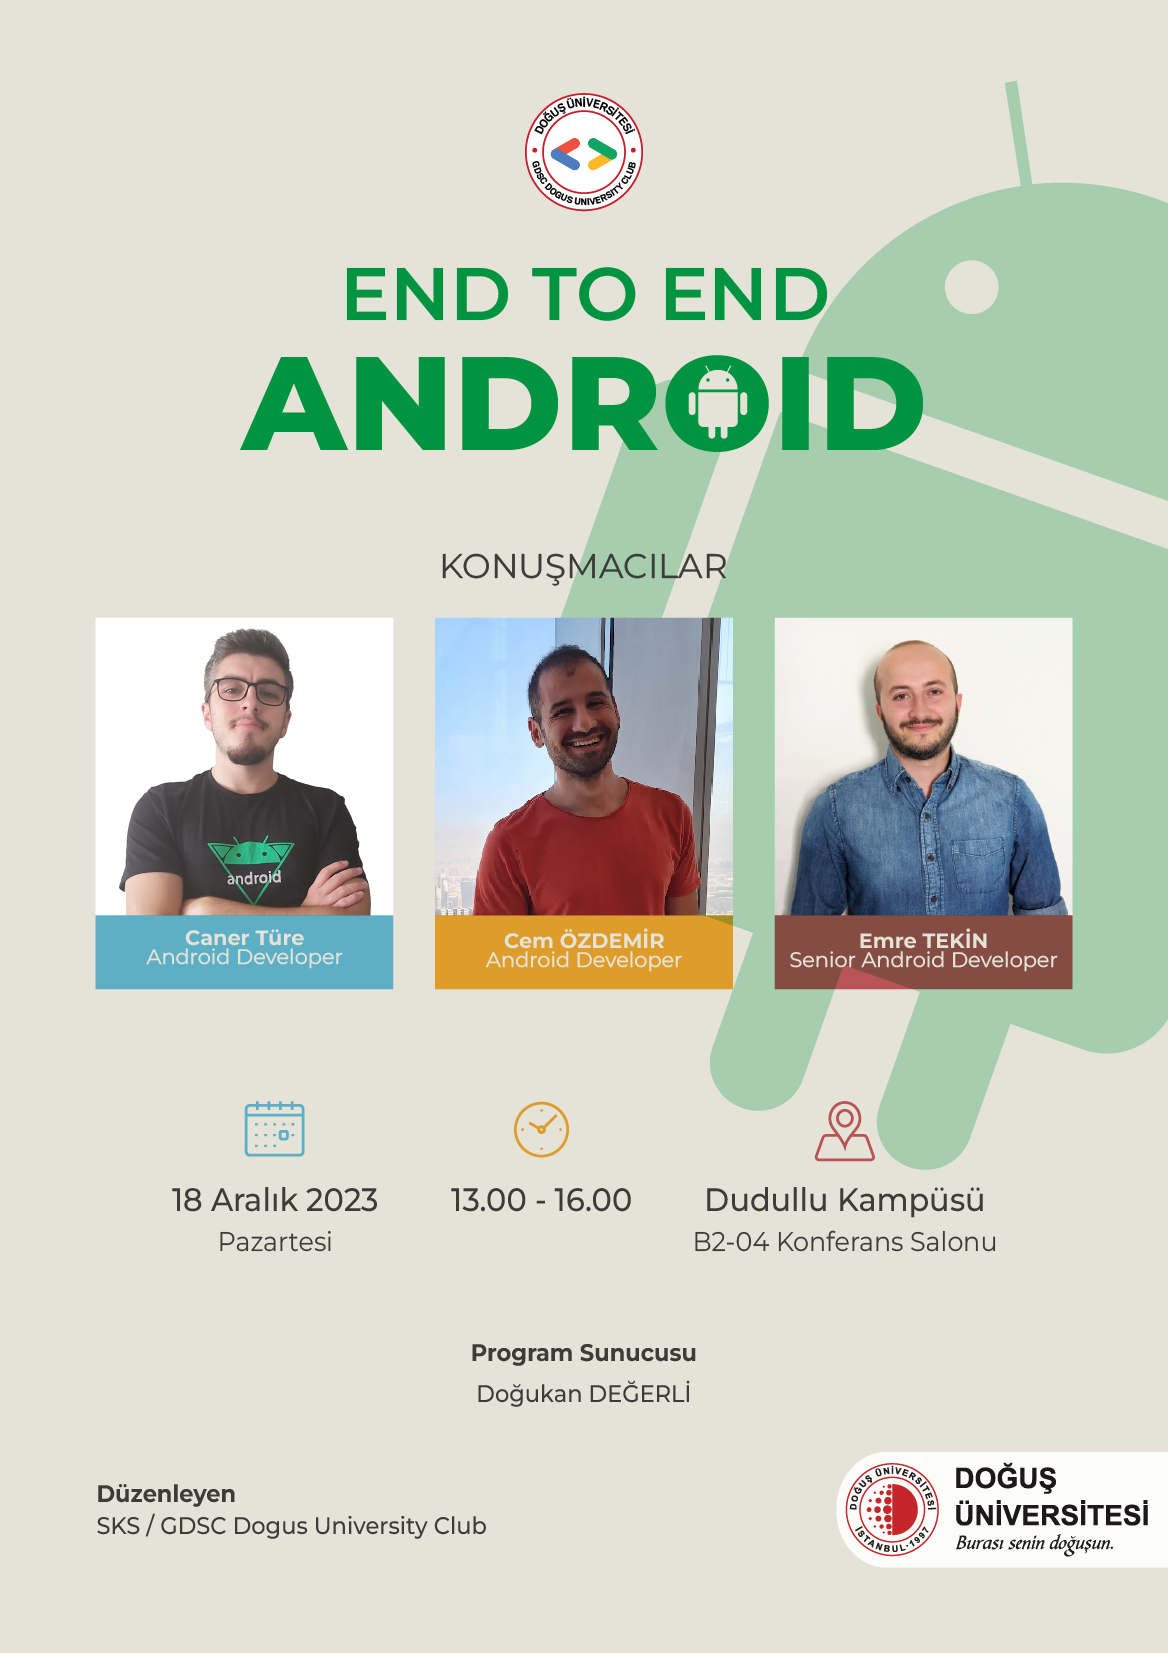 END TO END ANDROID_Afiş